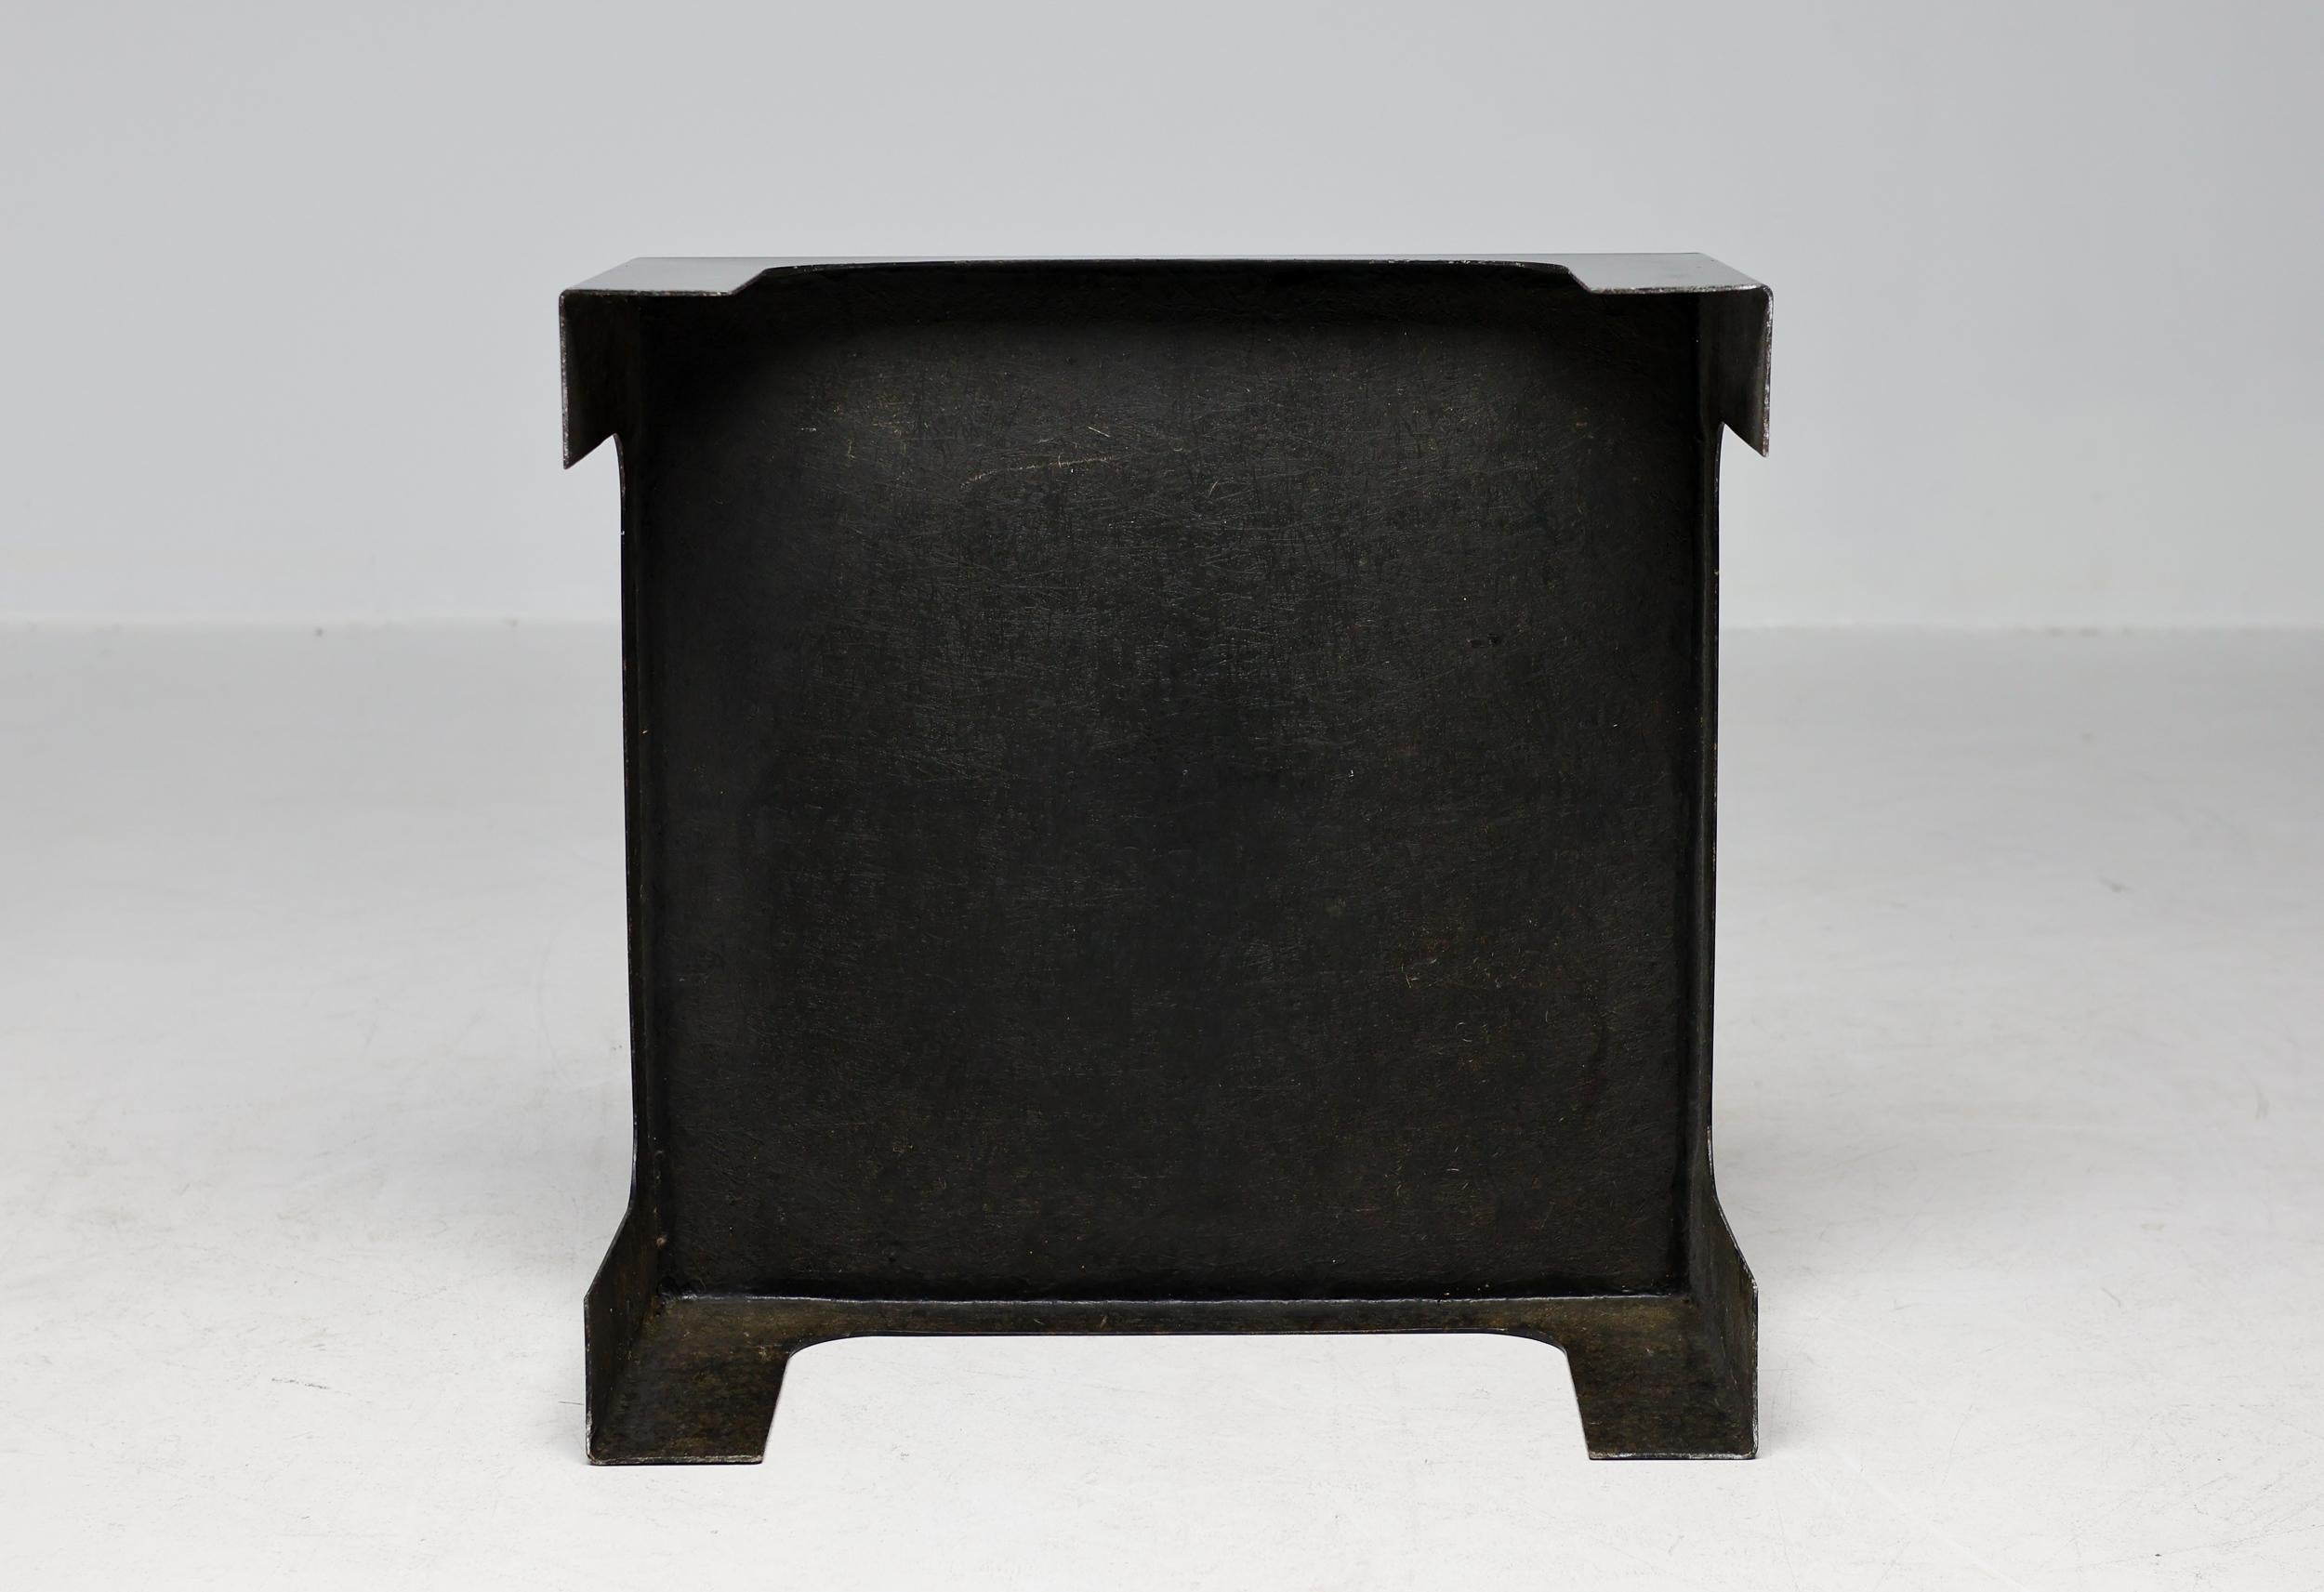 Mid-Century Modern black square Italian coffee table made in fiberglass.
Fine Minimalist design, unmarked.
Good condition, great patina of many minor scratches.
Can be refinished upon request.